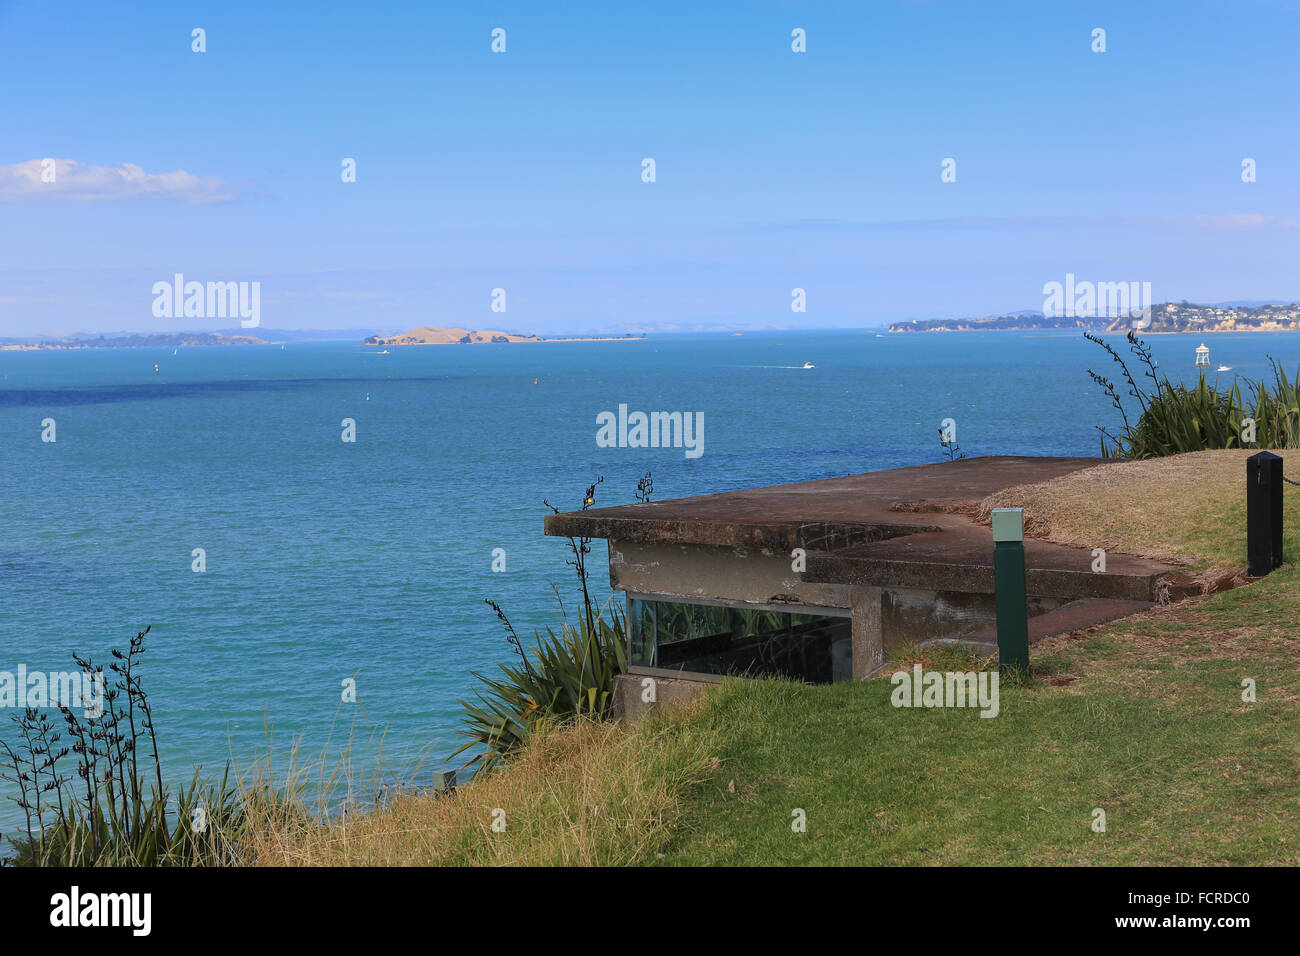 4-Inch Battery Observation Point at  North Head, Hauraki Gulf Maritime Park at Devonport, Auckland, New Zealand. Stock Photo